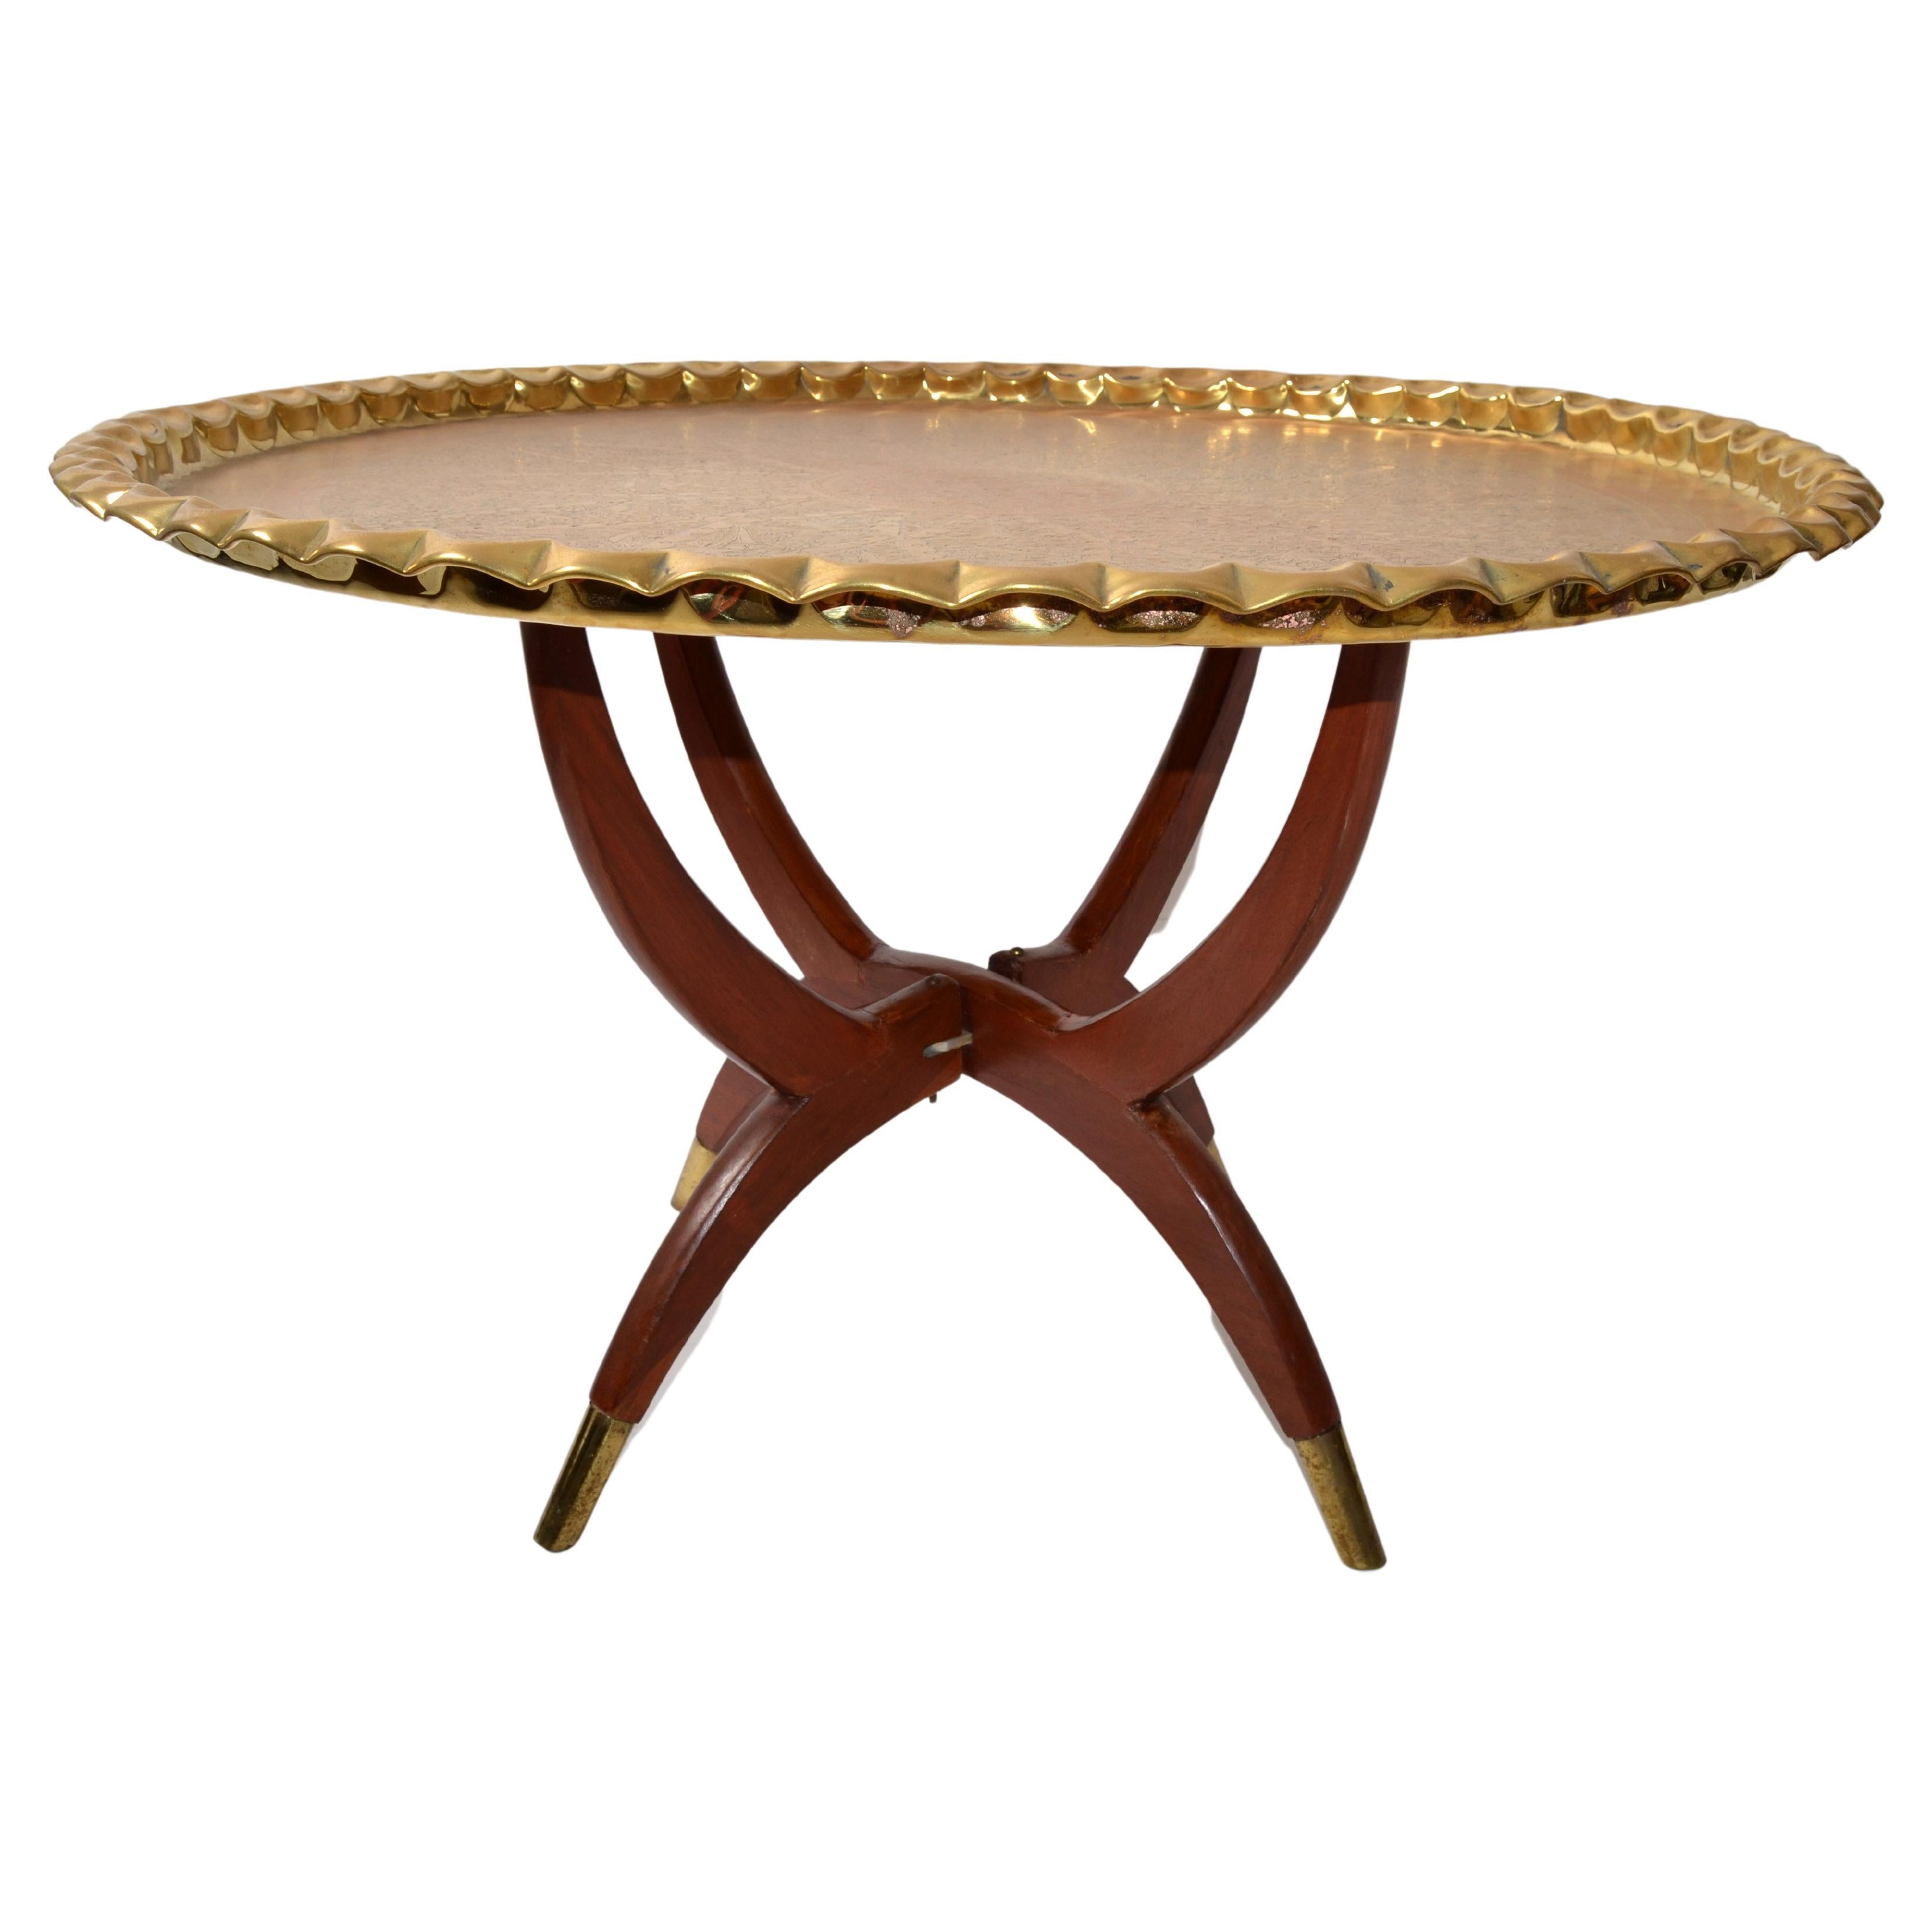 Oriental Vintage Round Walnut Spider Leg and Bronze Moroccan Tray Coffee Table For Sale